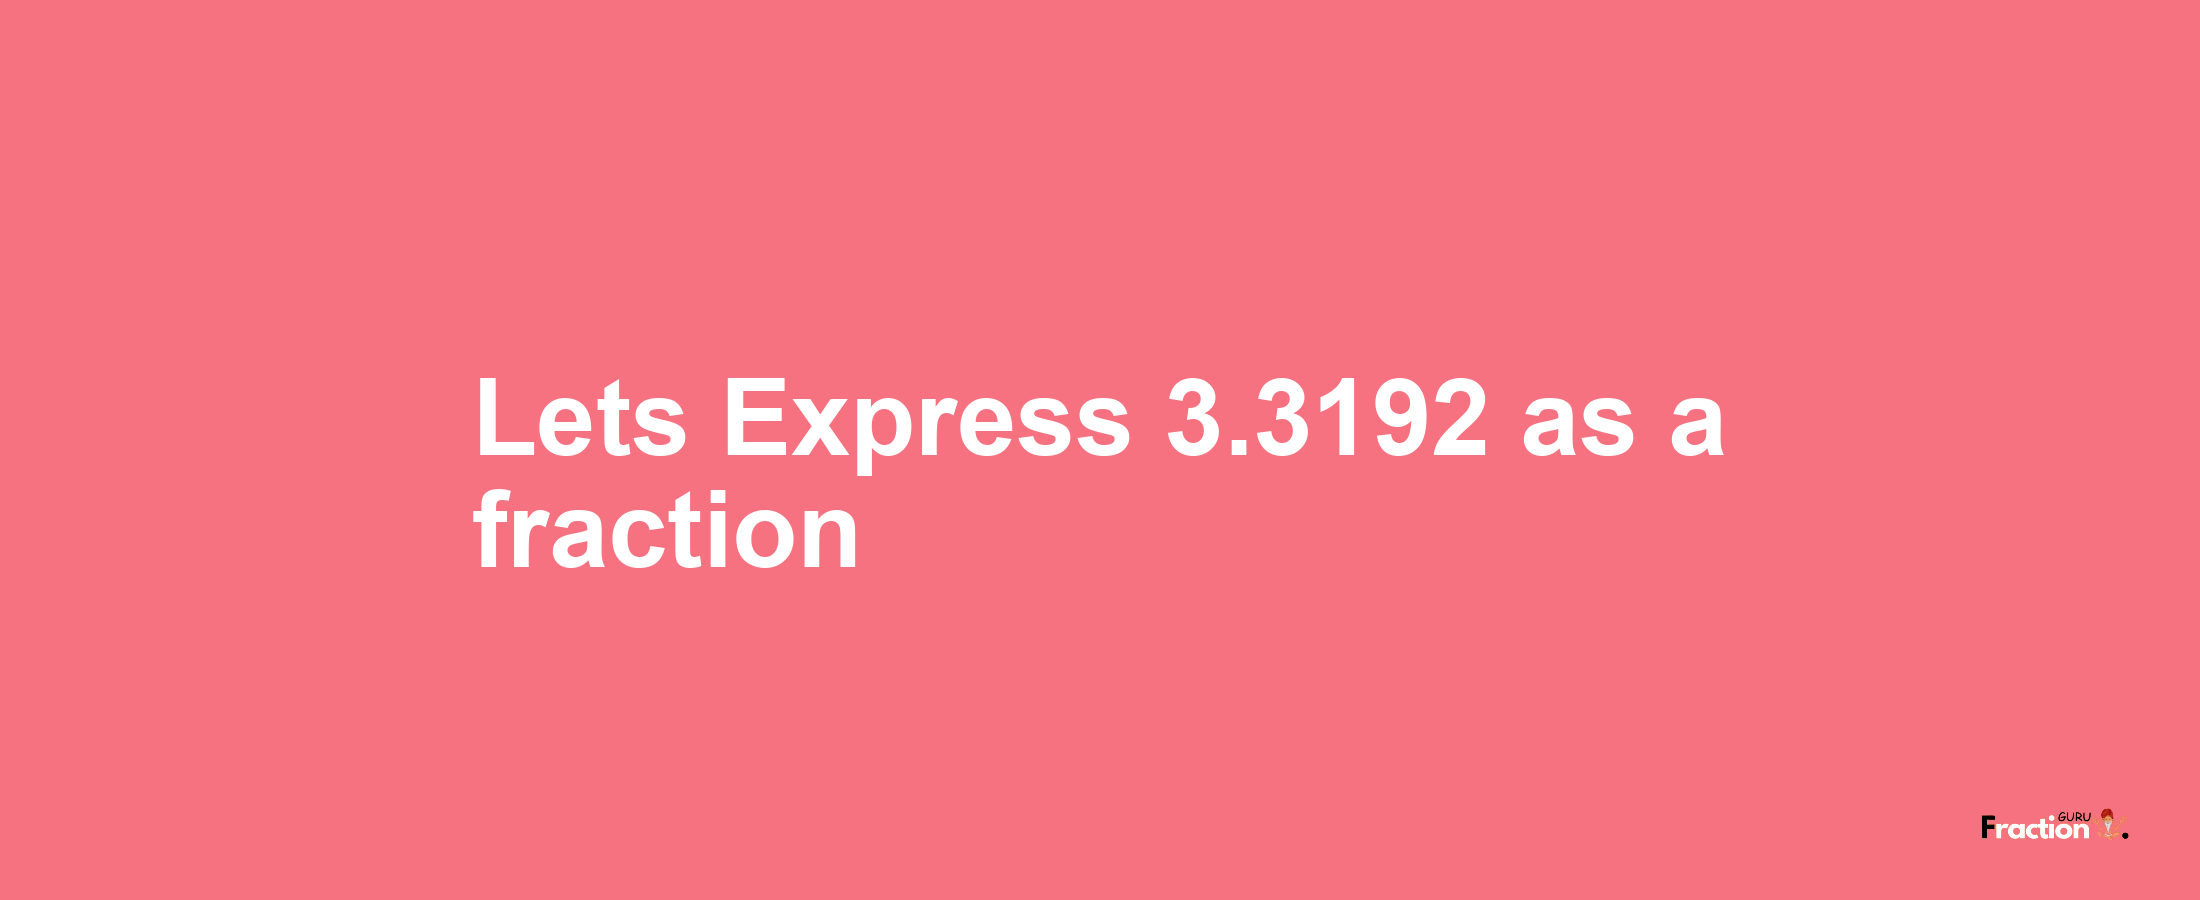 Lets Express 3.3192 as afraction